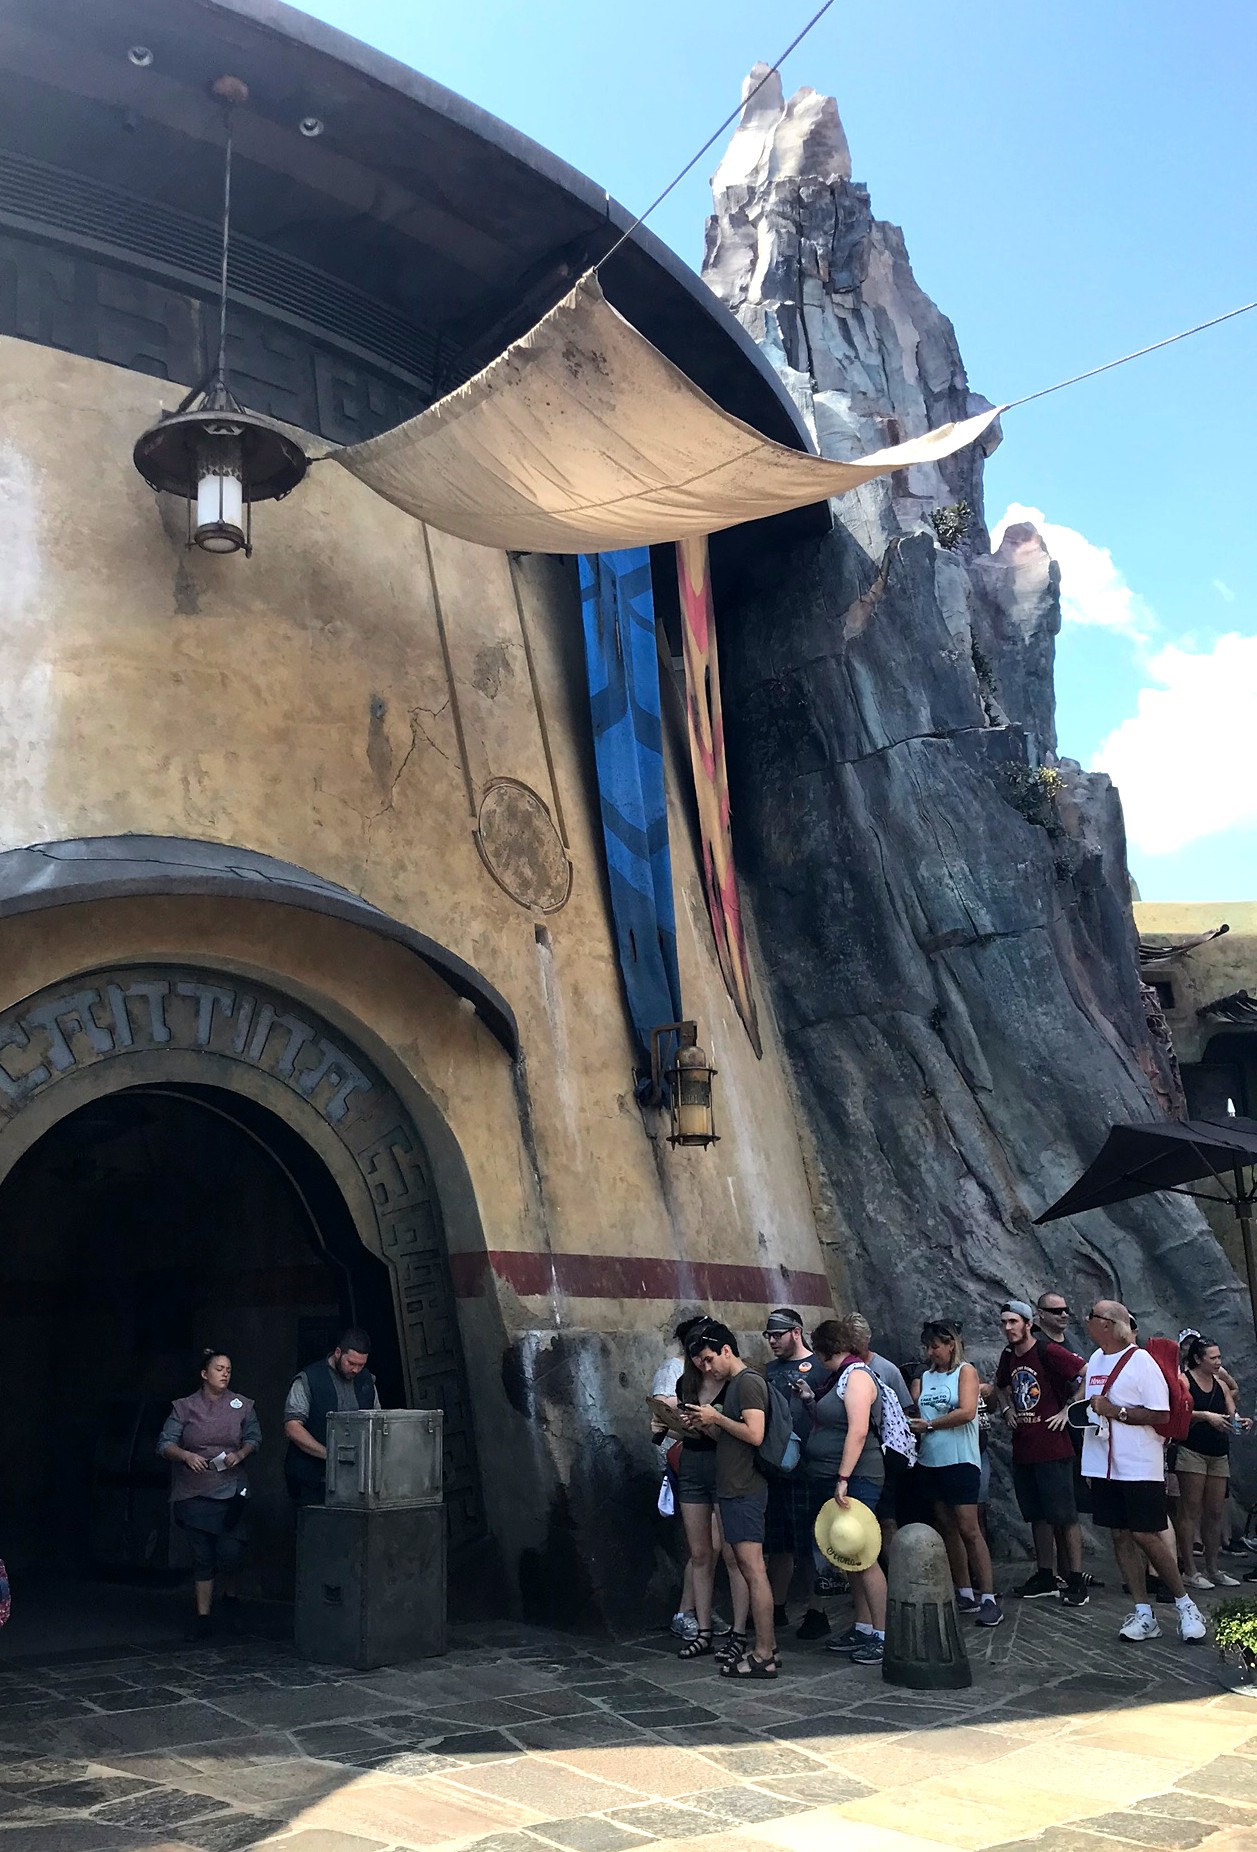 outside of Oga's Cantina with a line waiting to get in